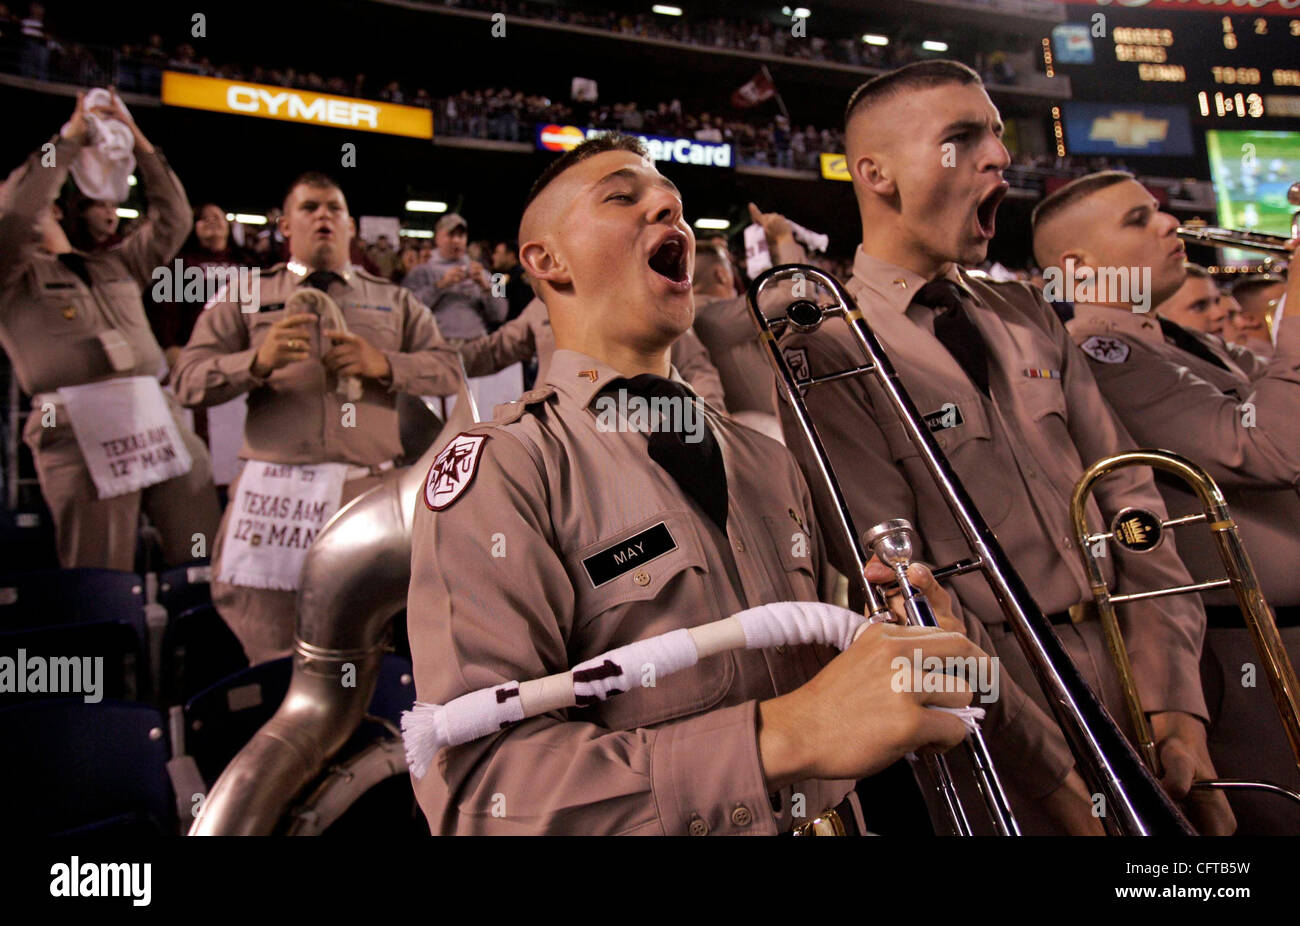 December 28, 2006. San Diego, California, USA    Texas A&M cadet corpsmen MATTHEW MAY (LEFT) and JAMES BLANKENSHIP celebrate the Aggies first touchdown during the first quarter of  the Pacific Life Holiday Bowl at Qualcomm Stadium.  Mandatory credit: photo by Nancee E. Lewis/San Diego Union-Tribune. Stock Photo